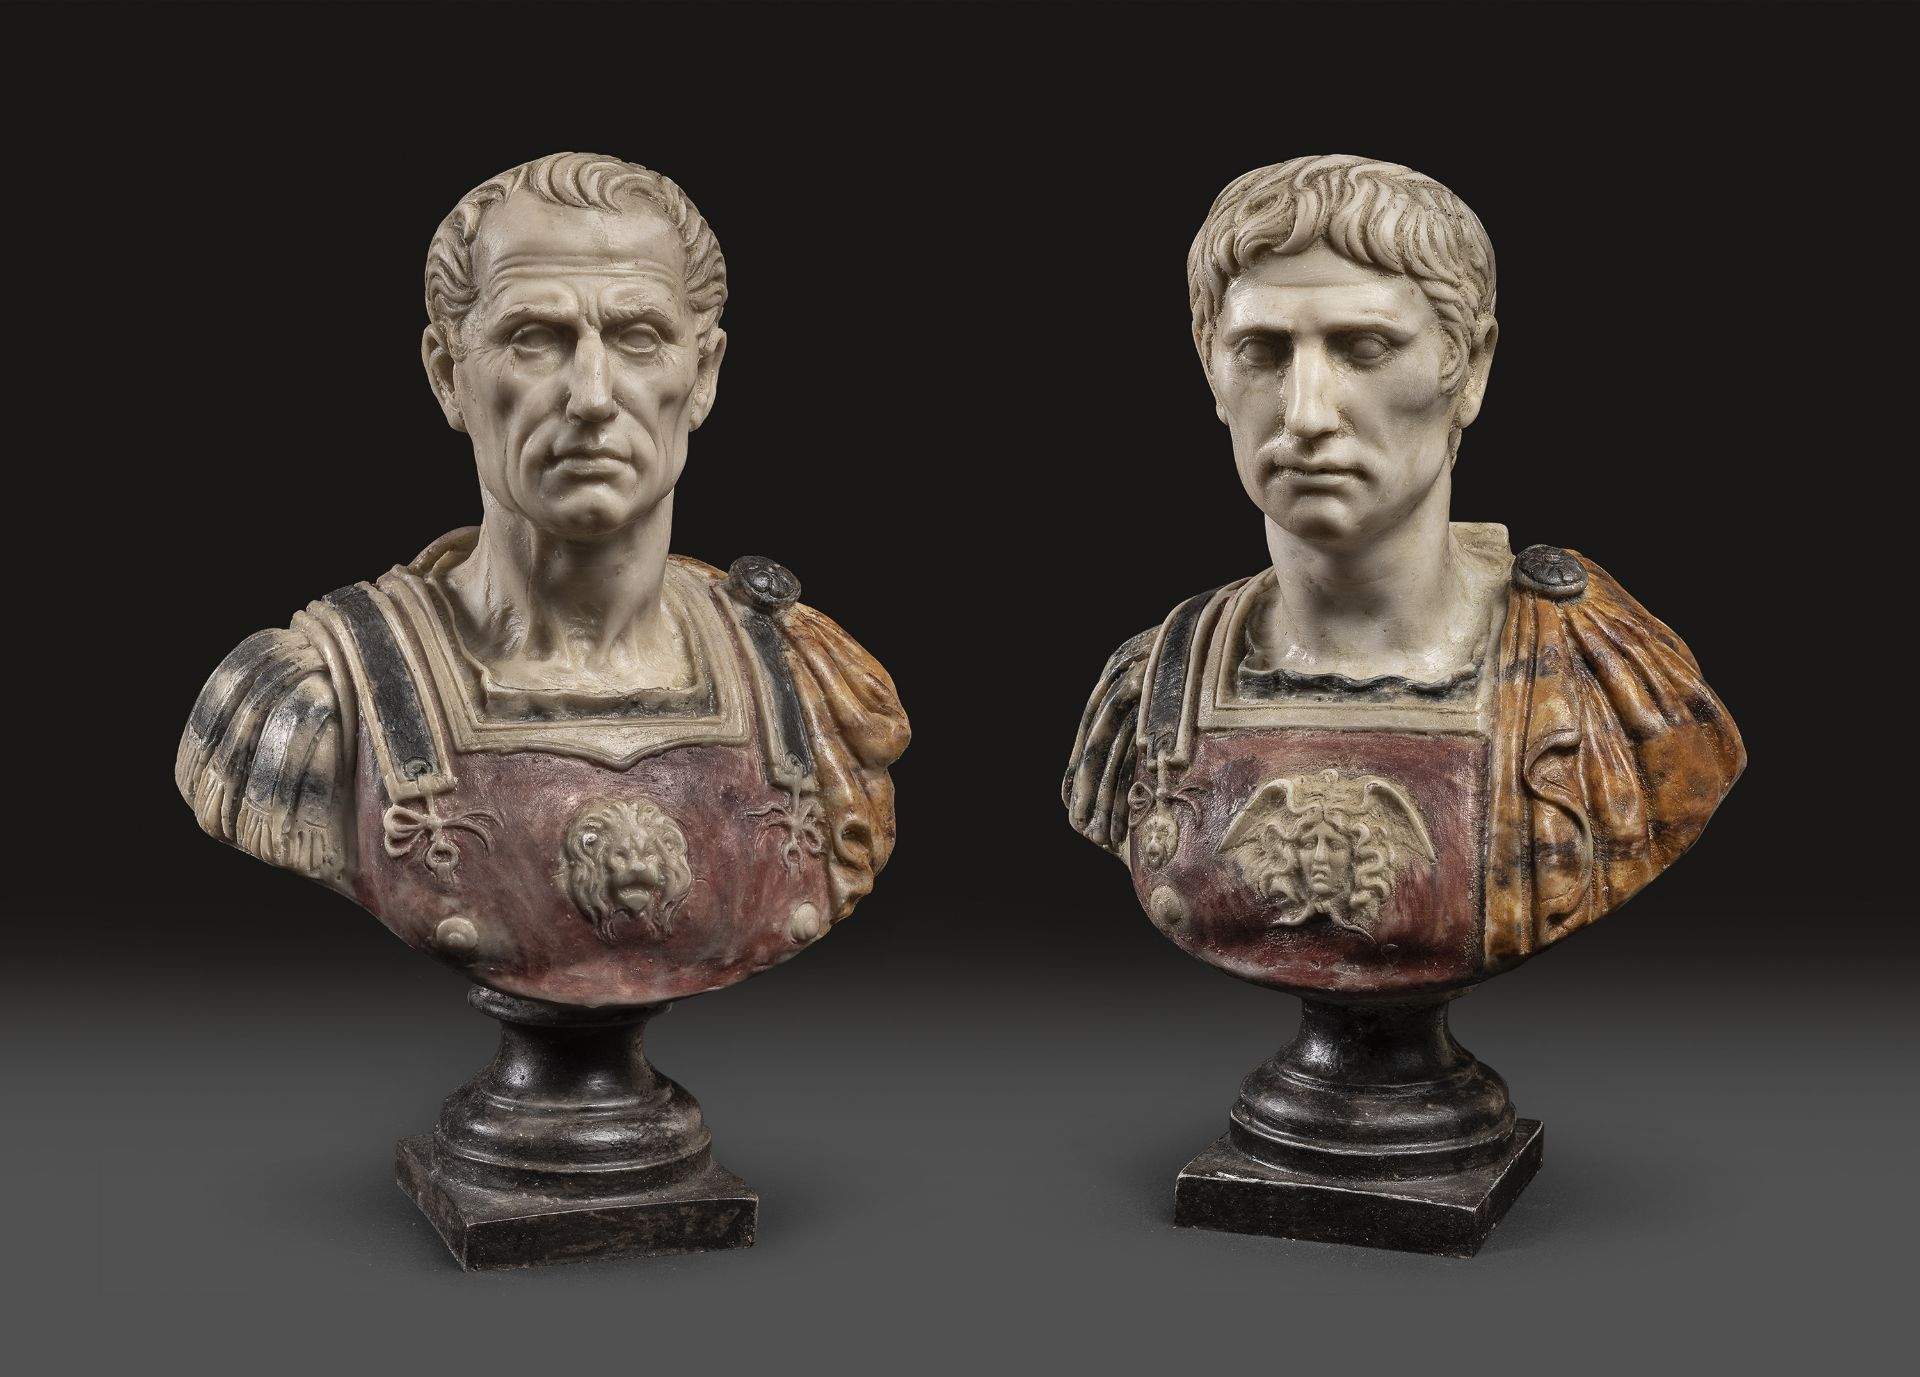 PAIR OF MARBLE DUST BUSTS OF ROMAN EMPERORS EARLY 20TH CENTURY